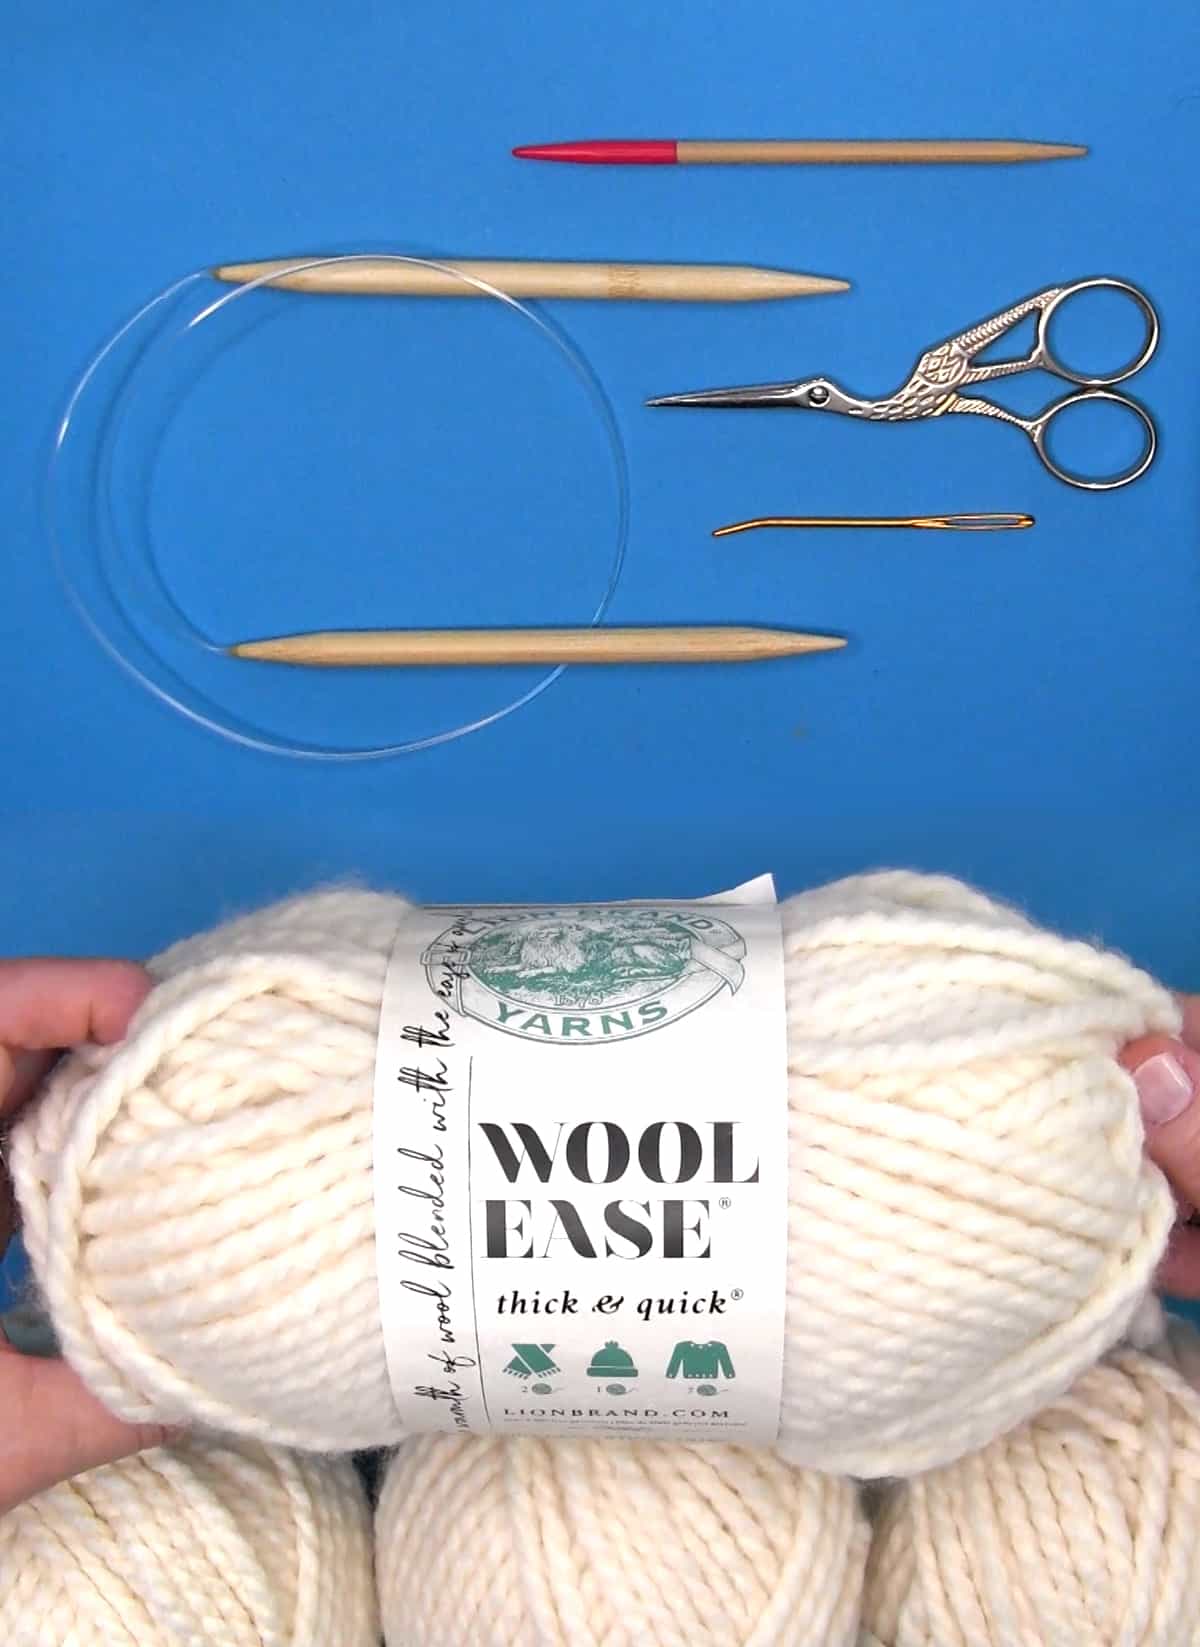 Knitting supplies of circular needle, tapestry needle, scissors, and Lion Brand Wool Ease Thick and Quick yarn.